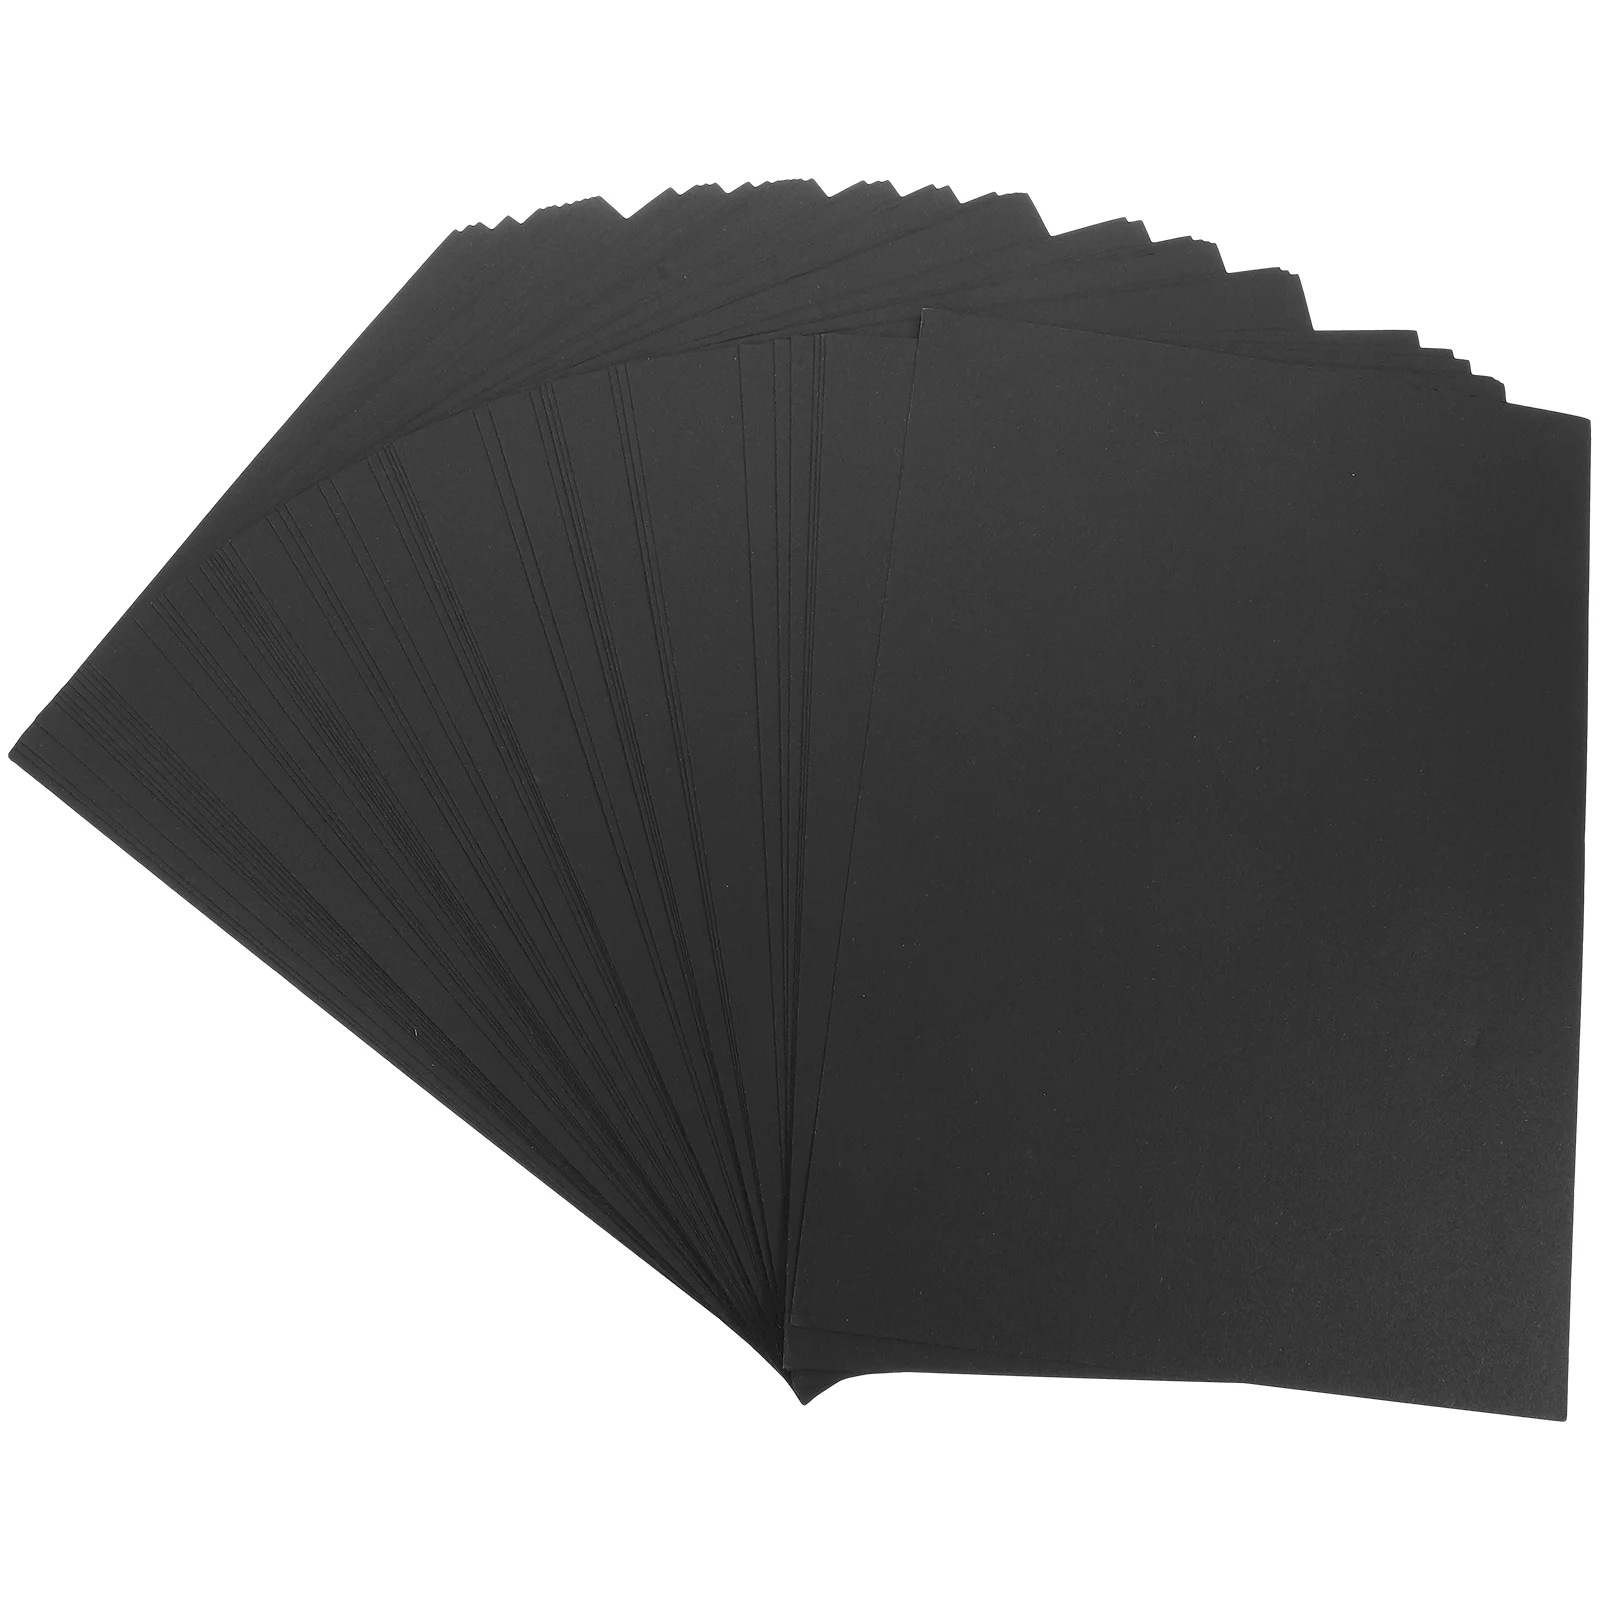 

50 Sheets Black Cardboard Graphing Paper Drawing A4 Cardstock White for Painting Sketch Greeting Business